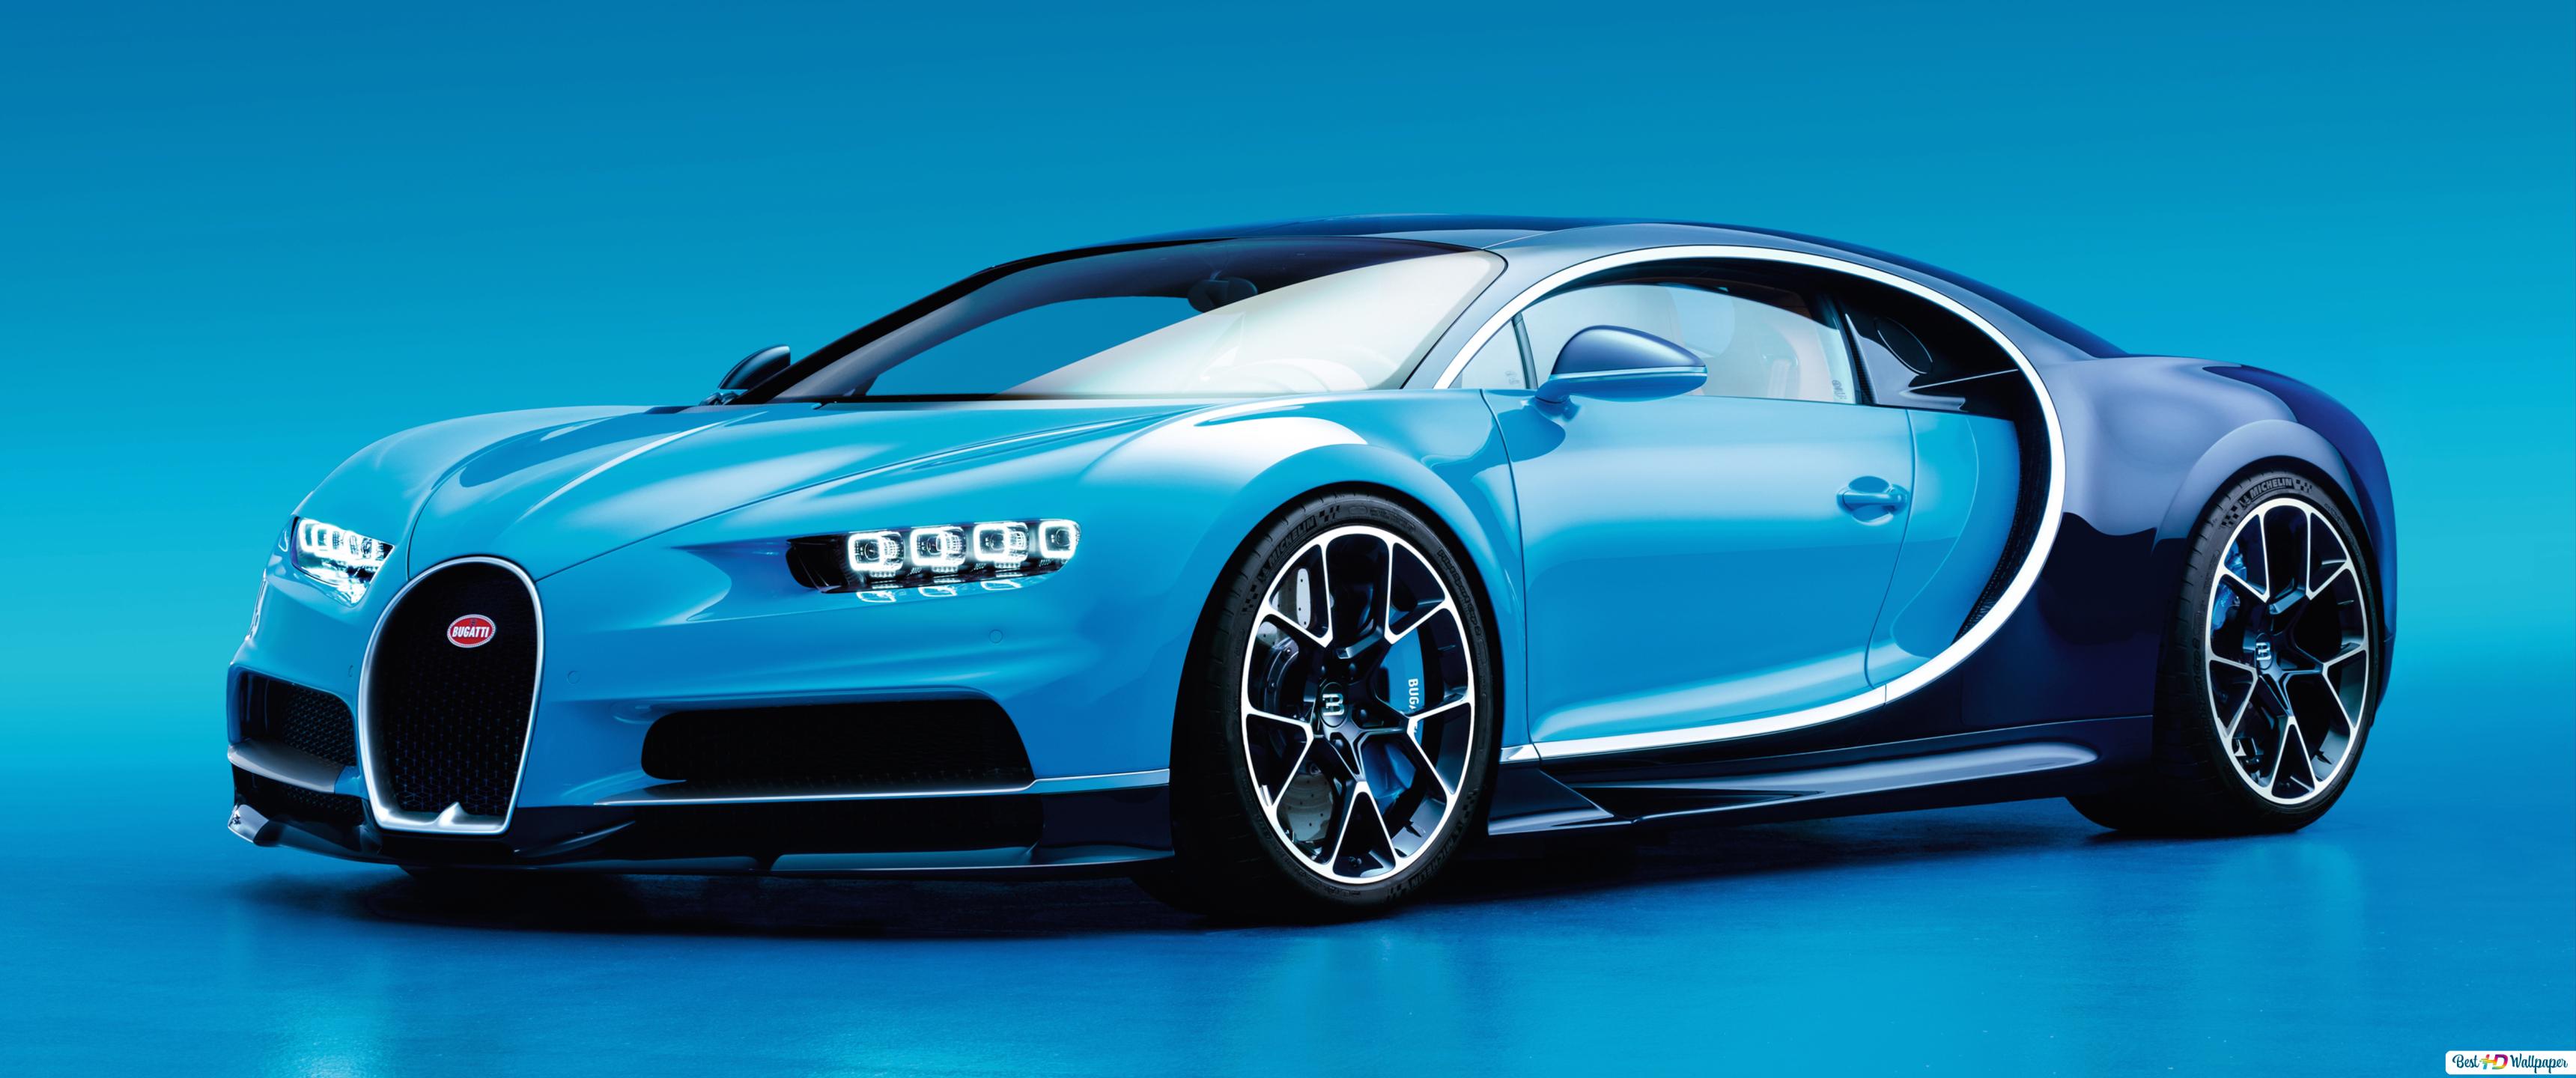 Blue Supercars Wallpapers